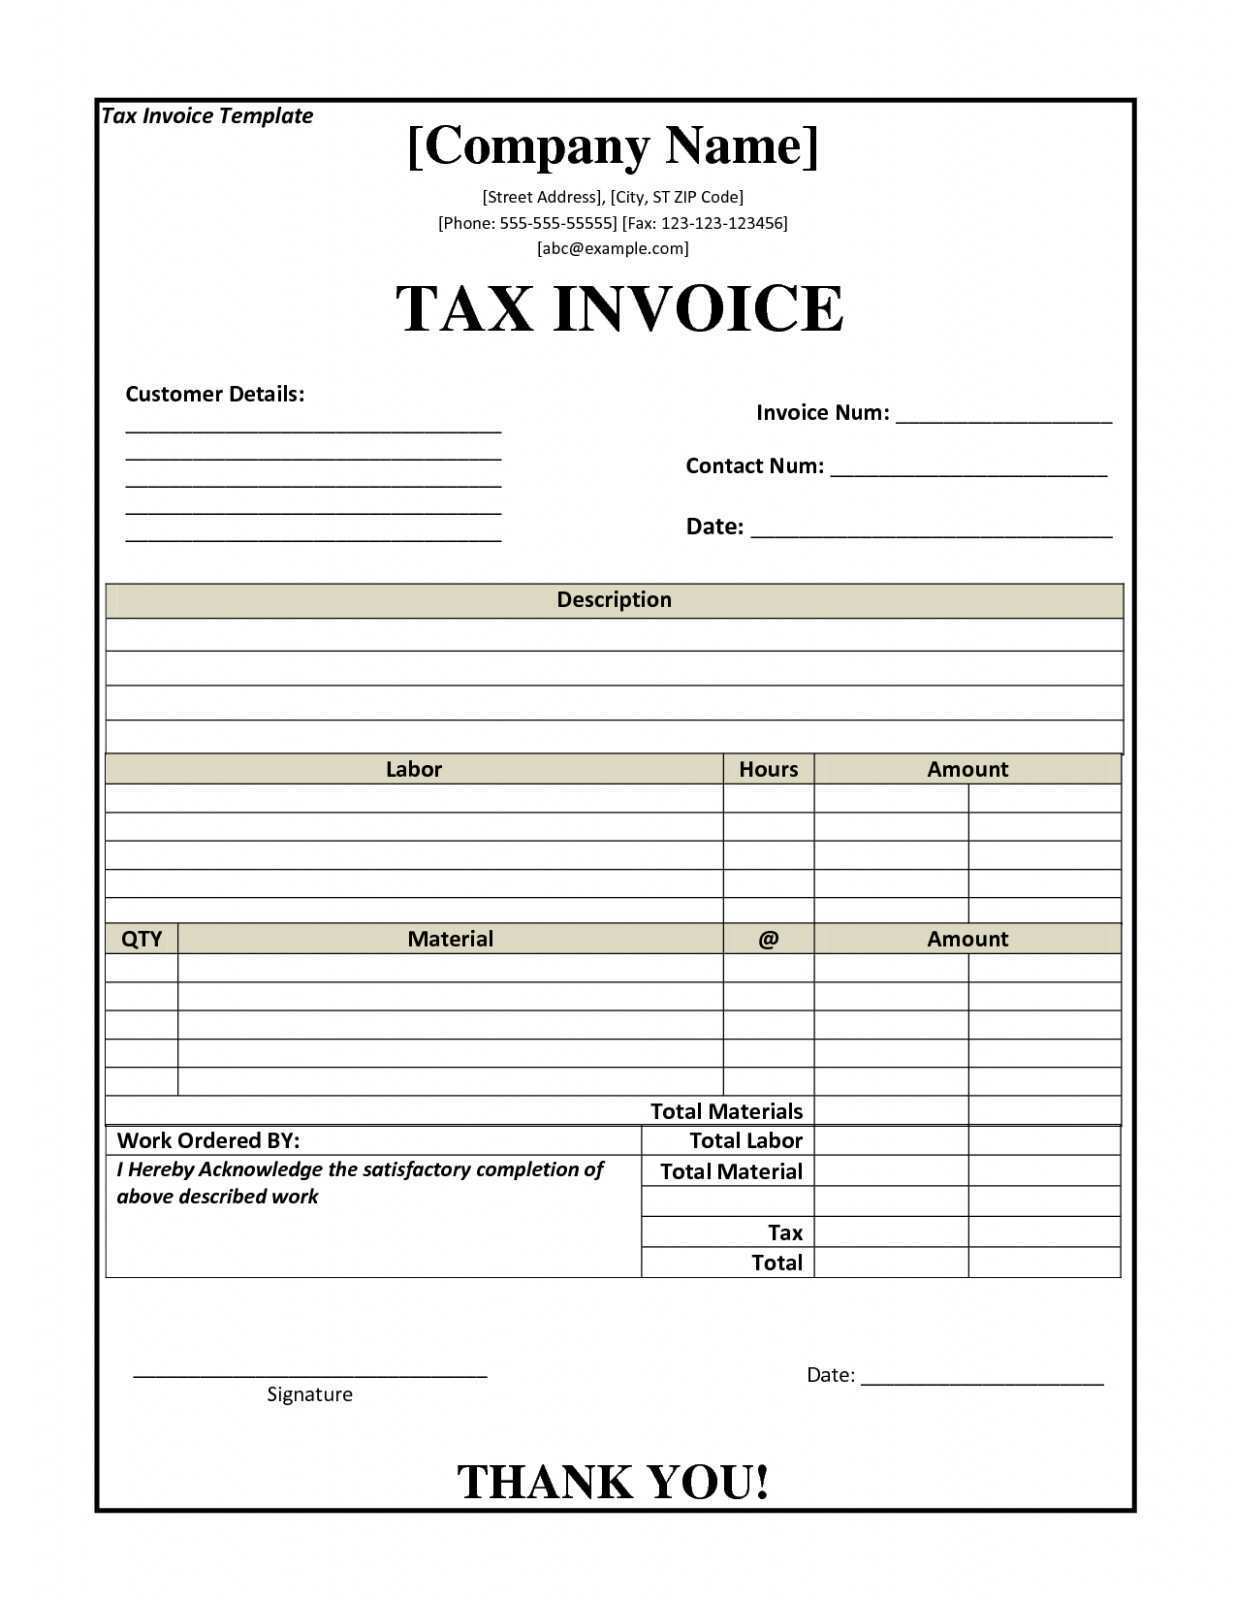 Tax Invoice Format In Excel from legaldbol.com